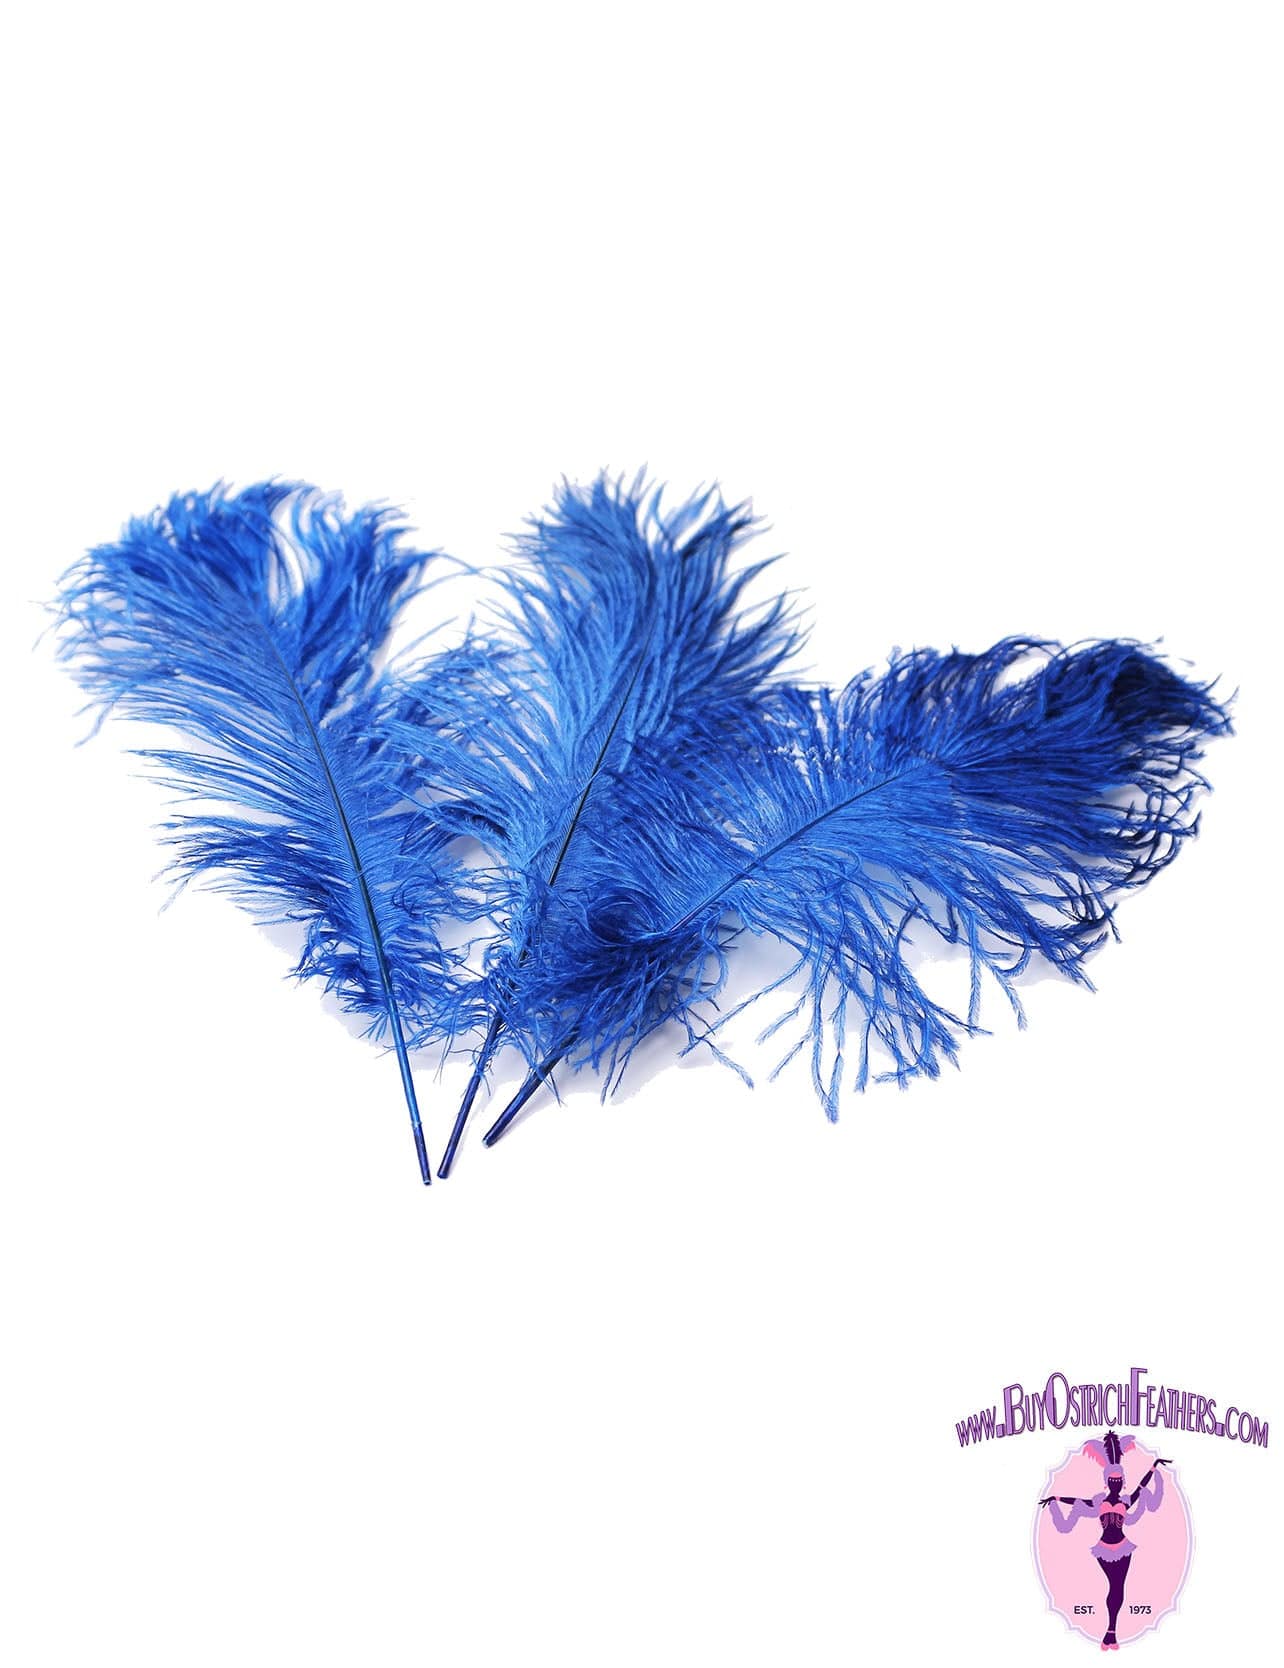 Ostrich Feather Tail Plumes 13-16" (Royal Blue) - Buy Ostrich Feathers